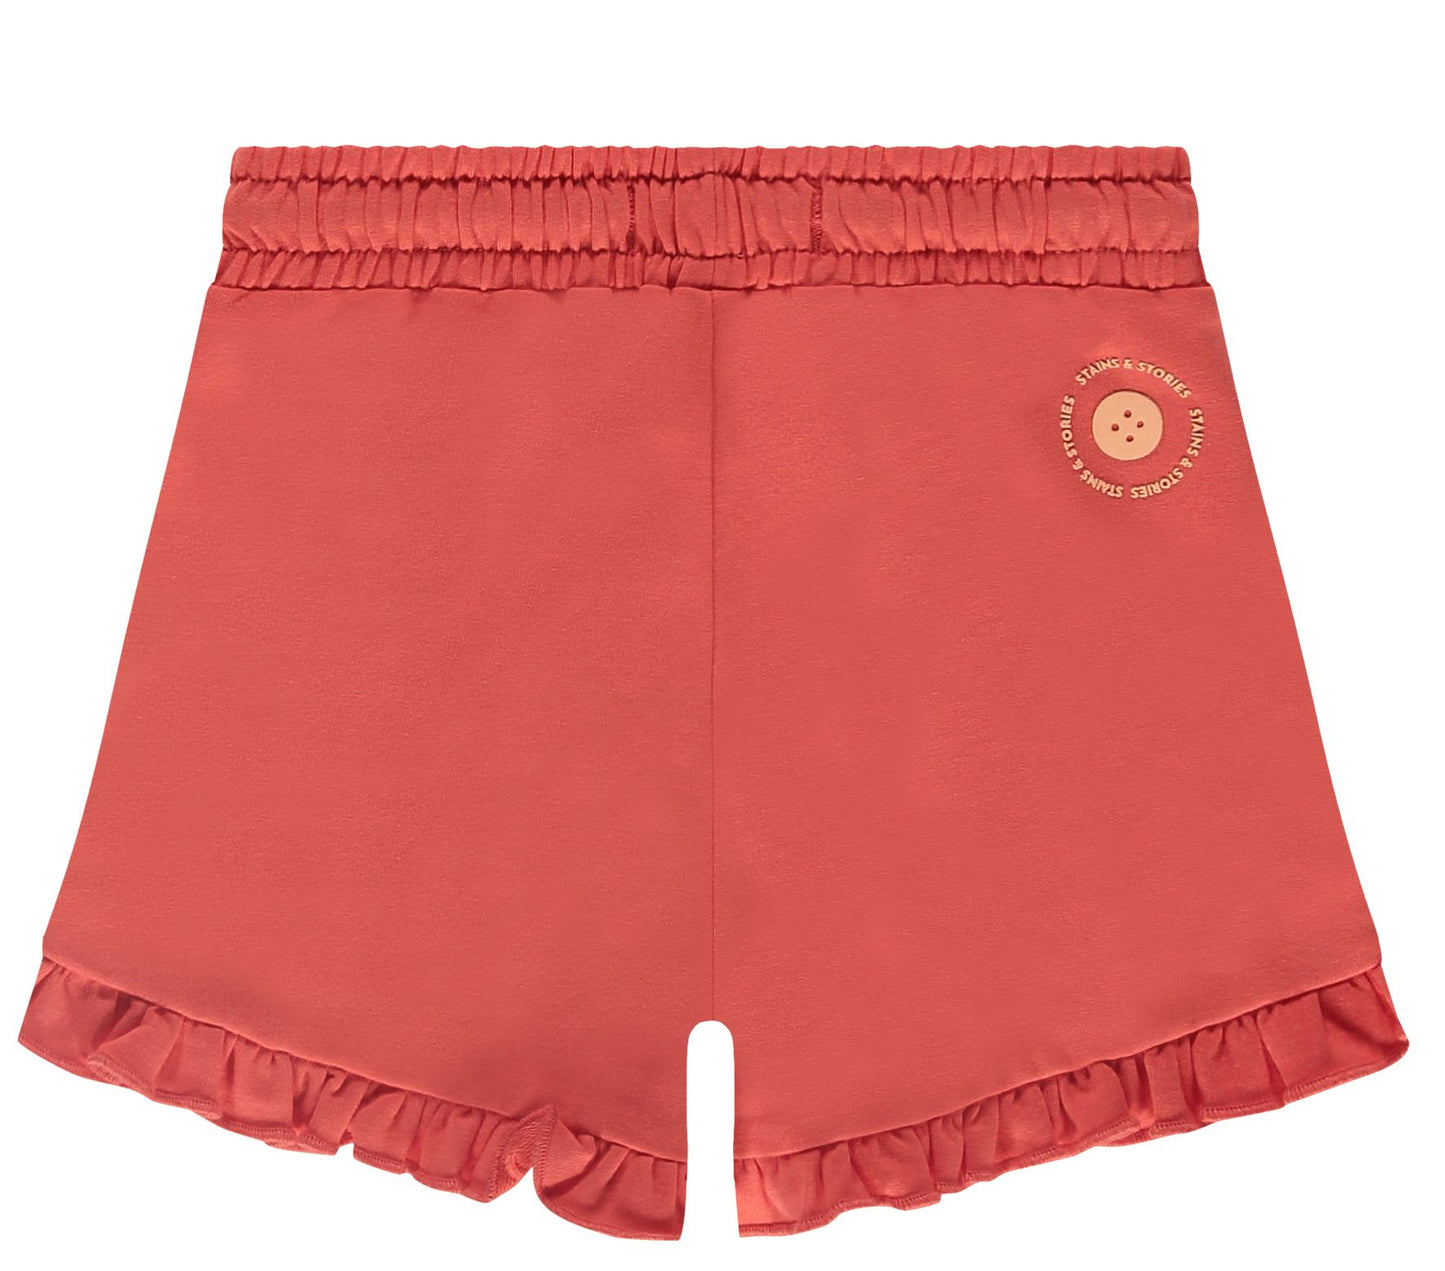 Grapefruit Drawstring Shorts 150 GIRLS APPAREL 2-8 Stains and Stories 